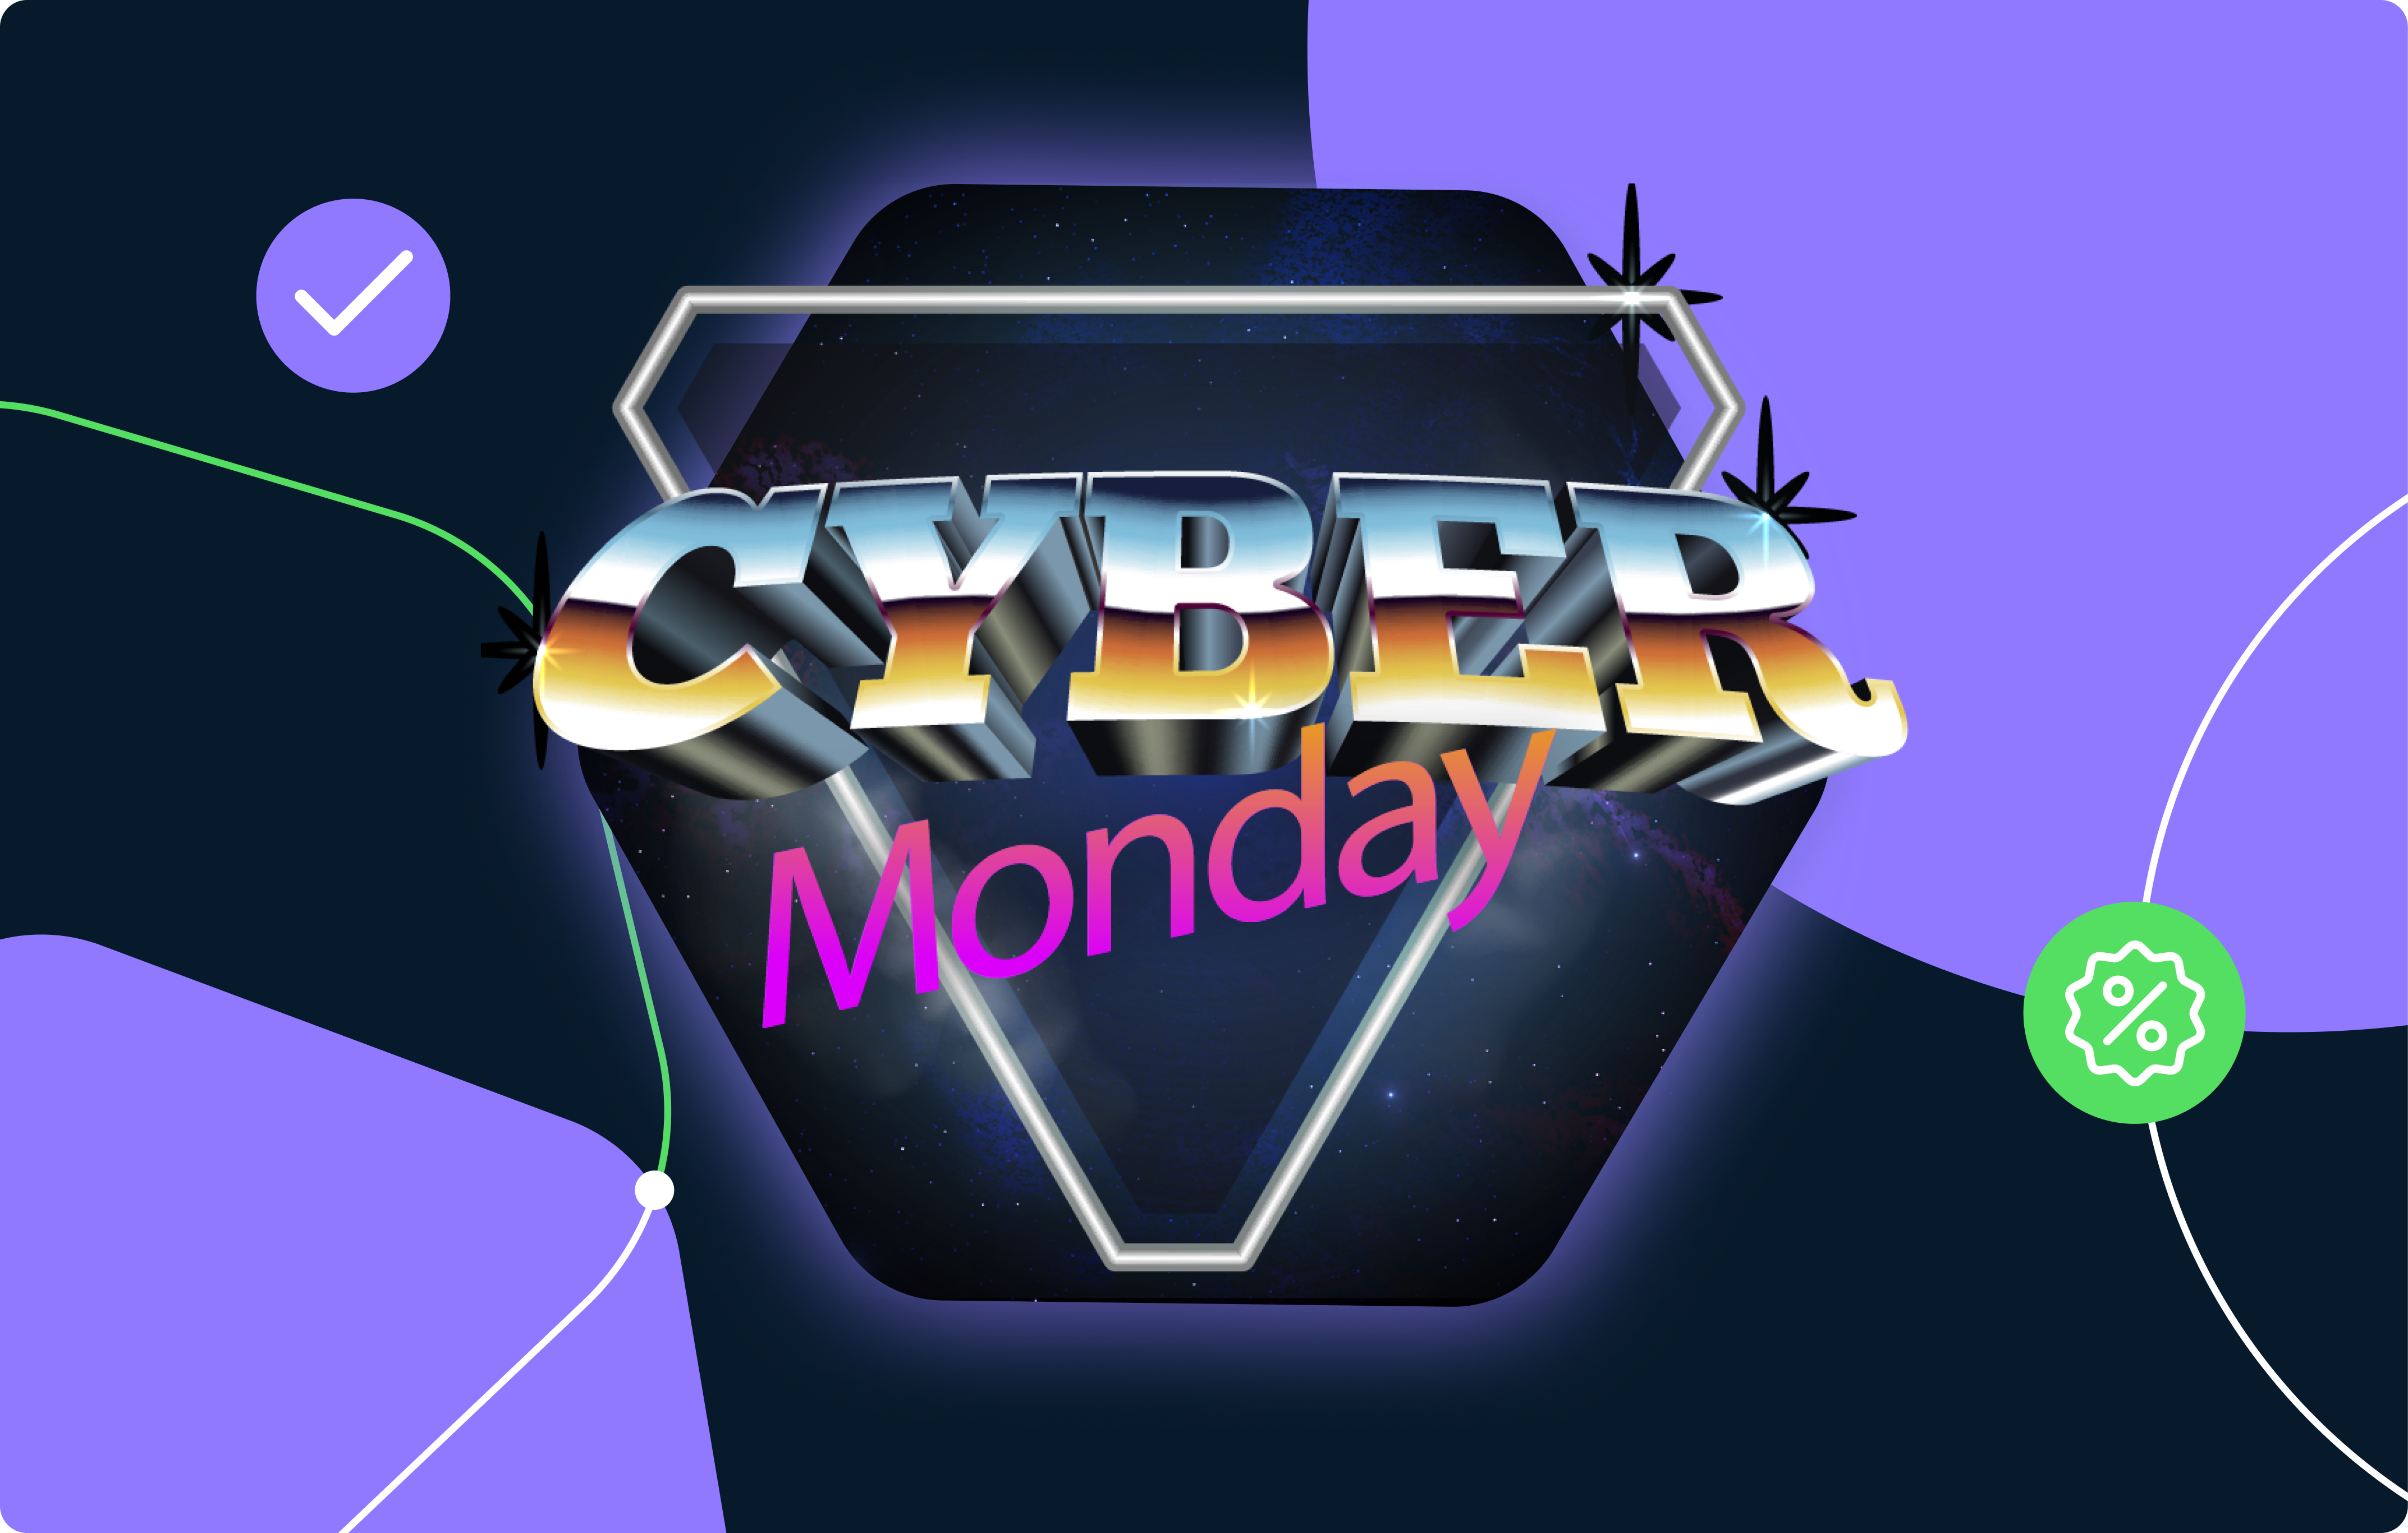 Tips to Execute a Successful Cyber Monday Marketing Plan